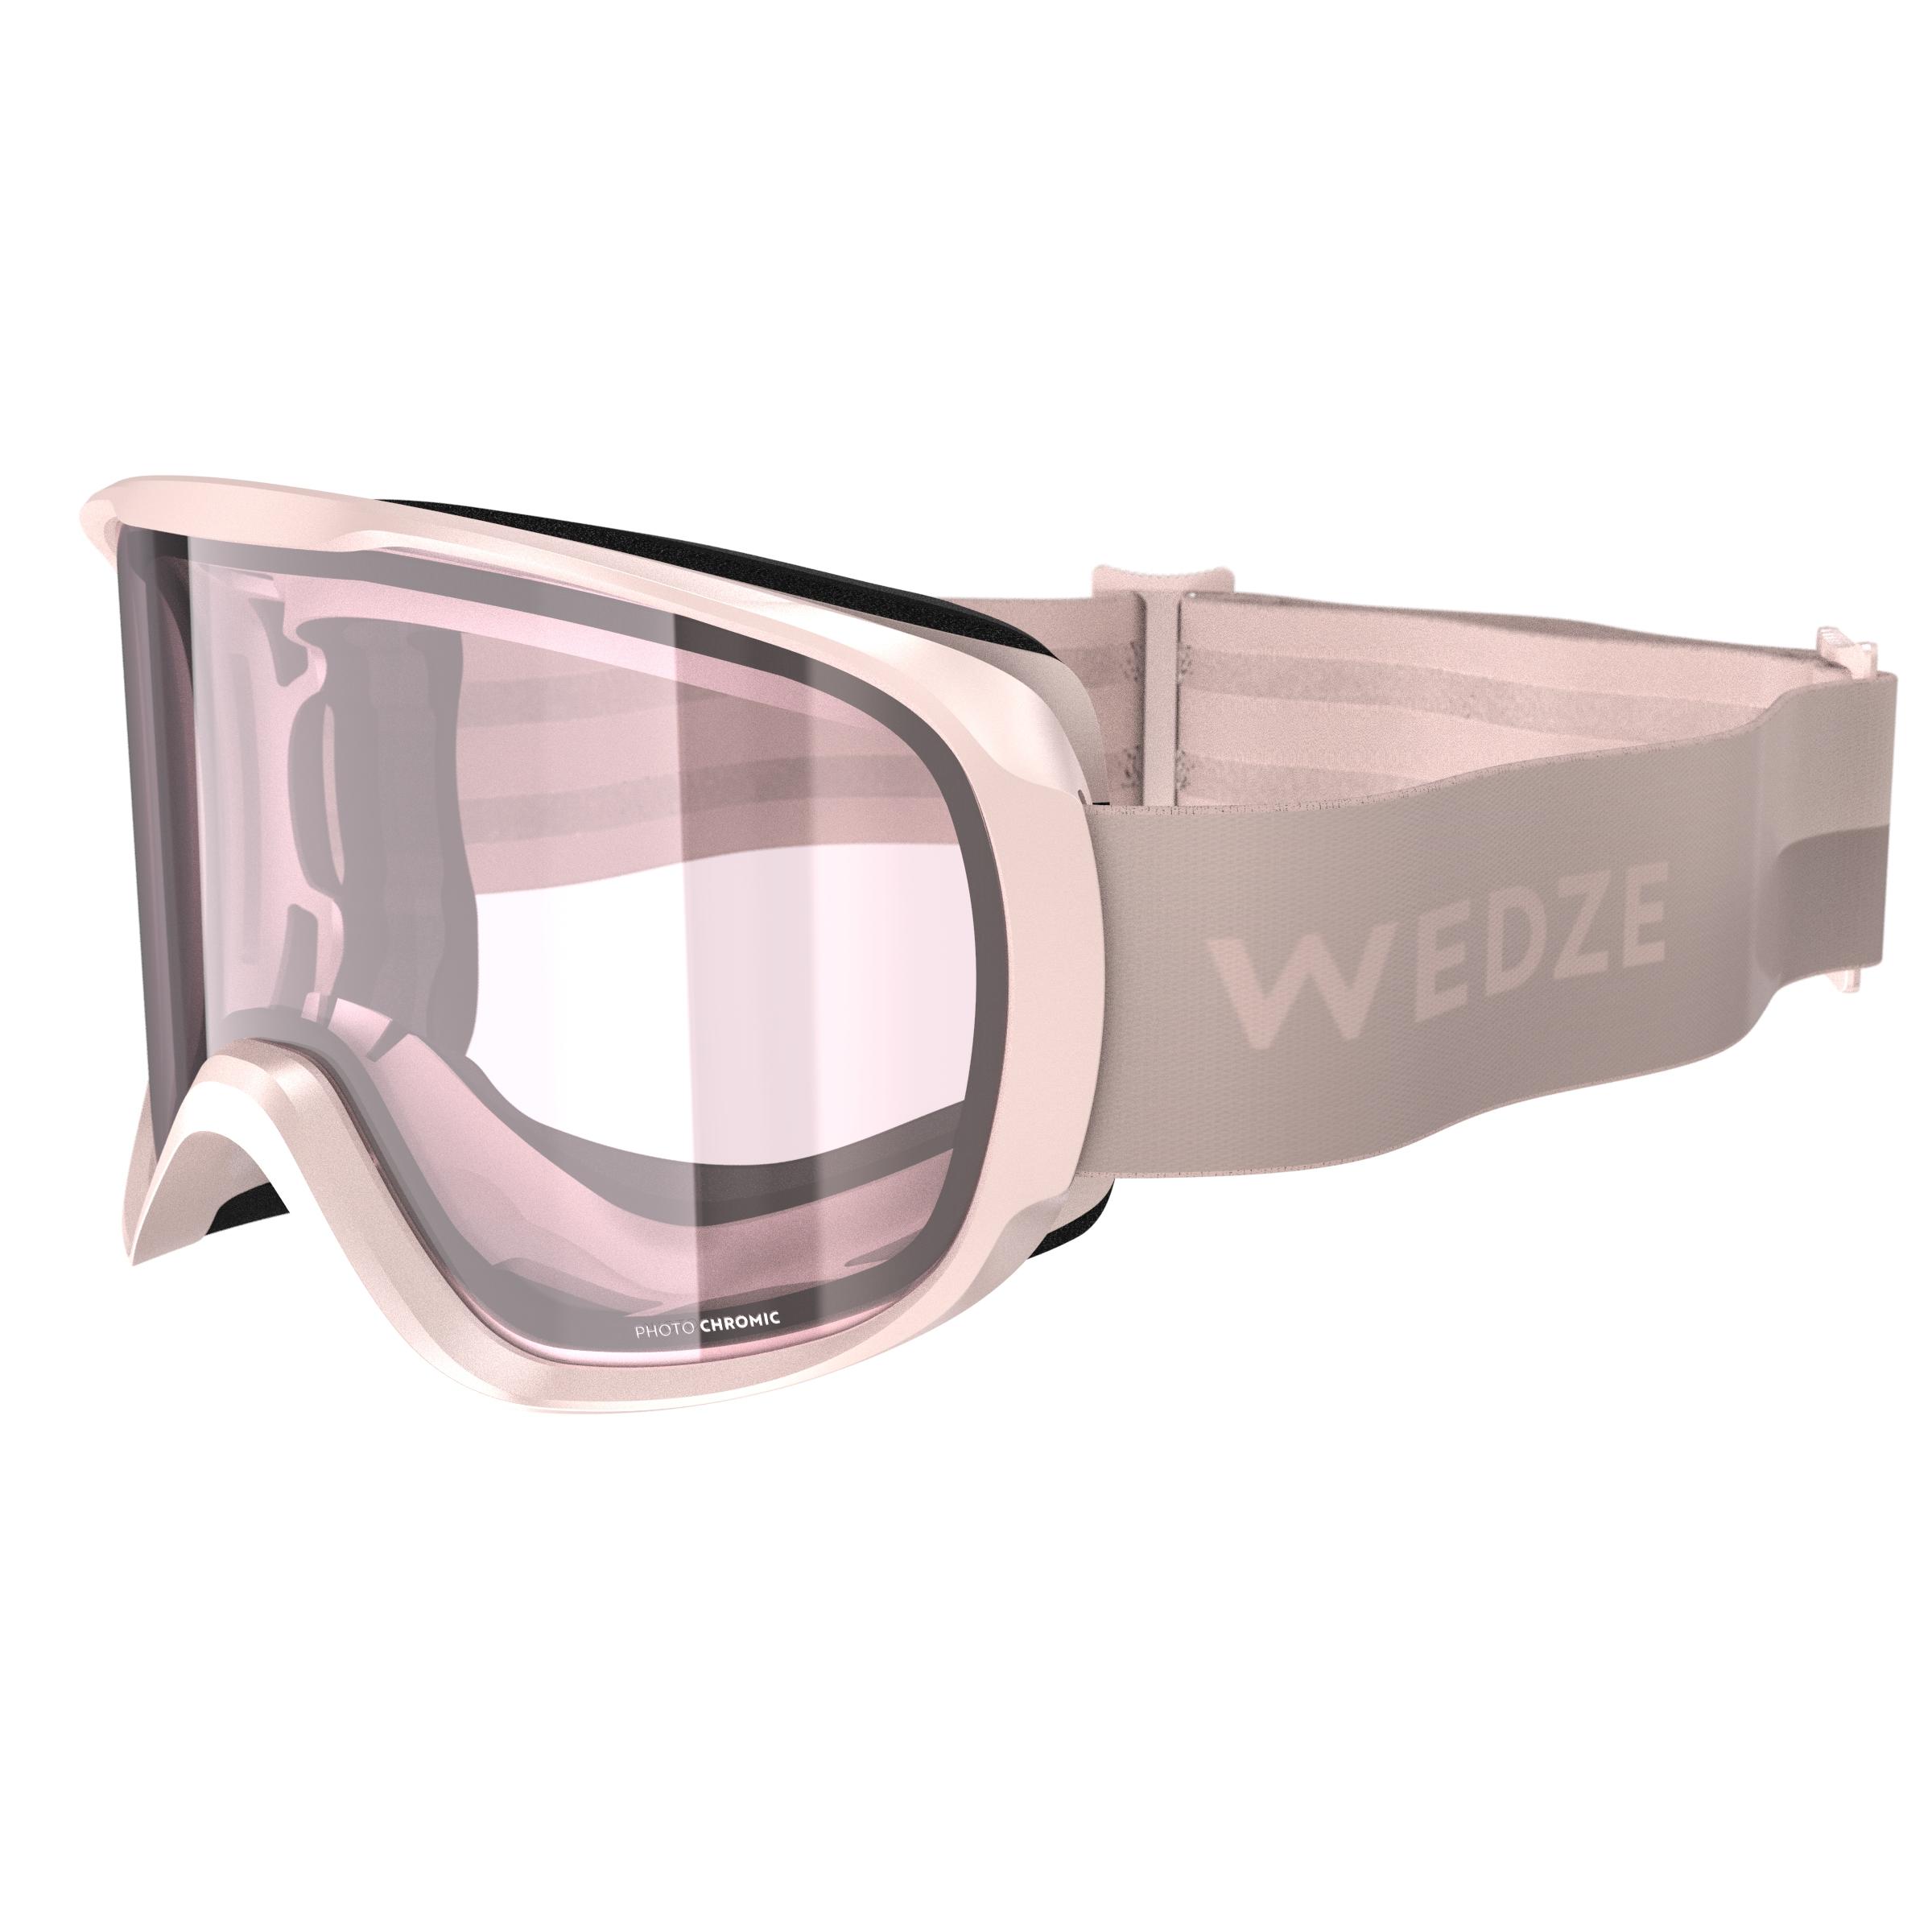 WEDZE Women and Girl's Skiing and Snowboarding Goggles G 500 All Weather Pink